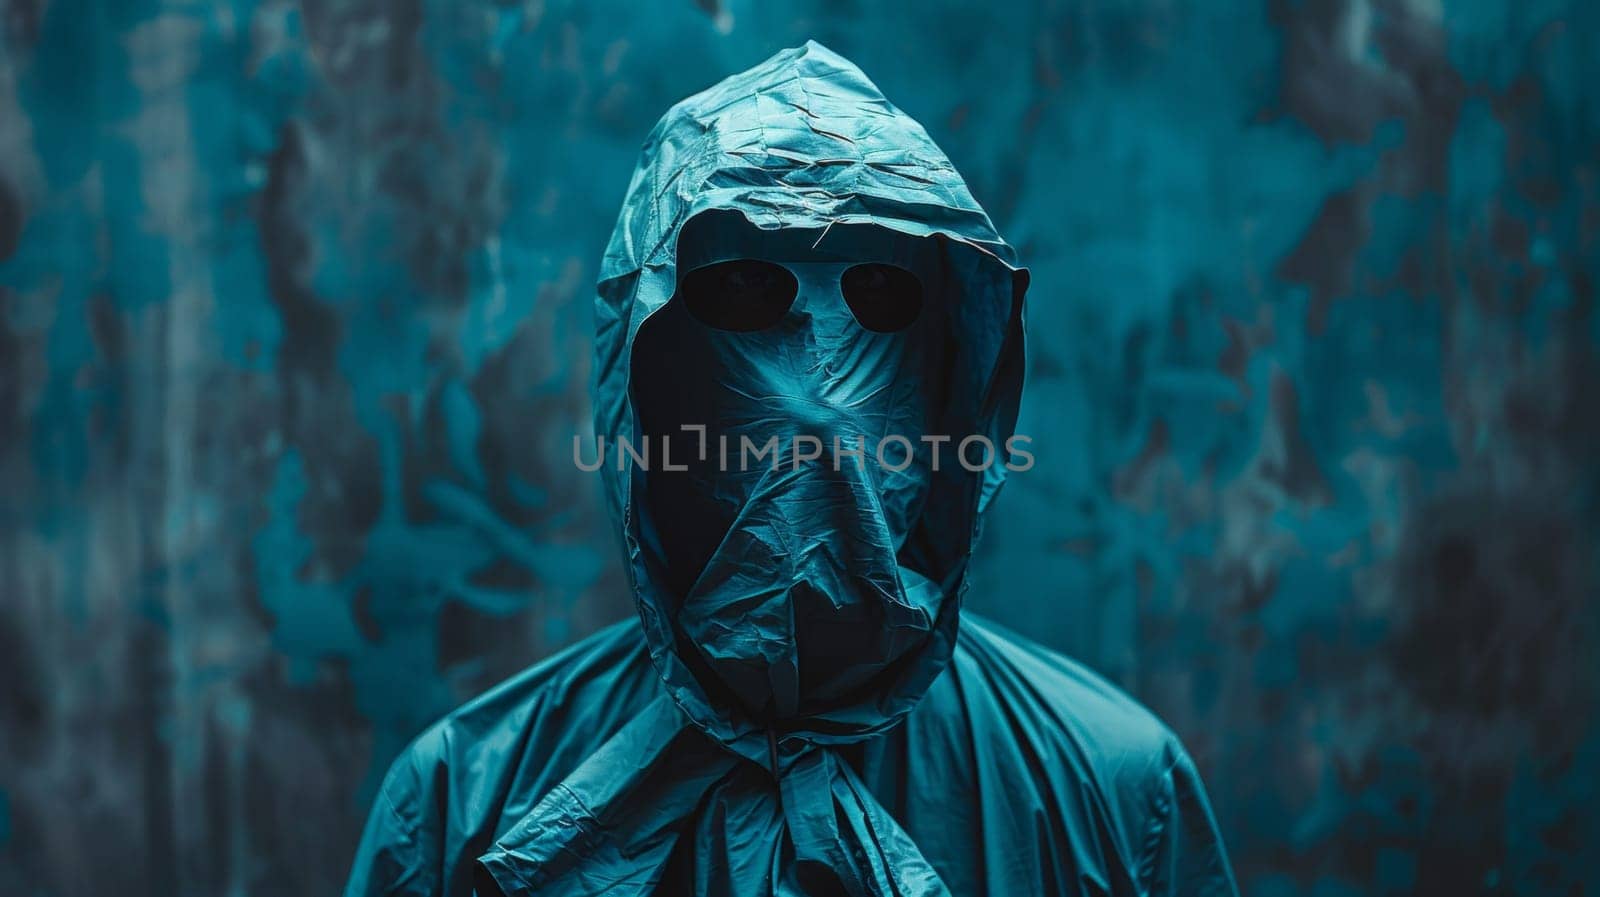 A person wearing a mask and raincoat with hood up